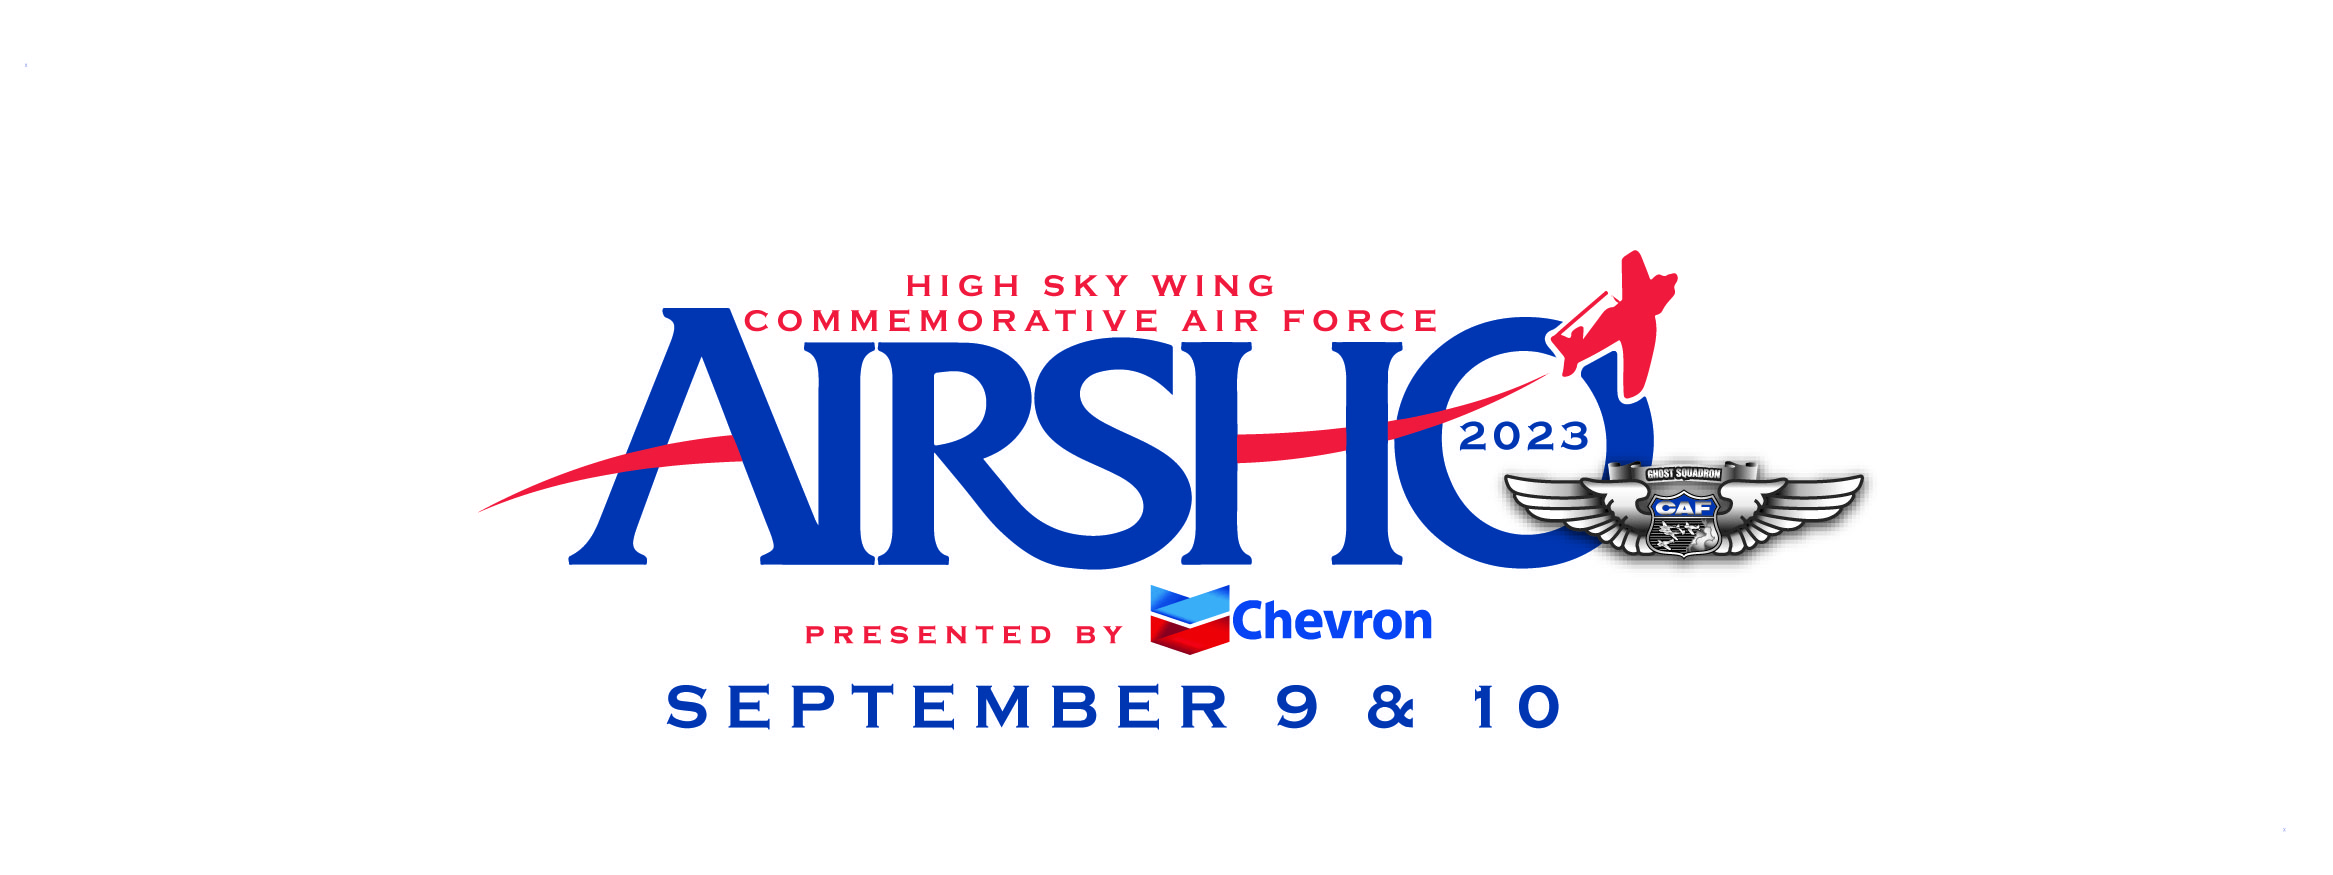 AIRSHO 2023 Presented by Chevron Sept 9 10 2023 blue